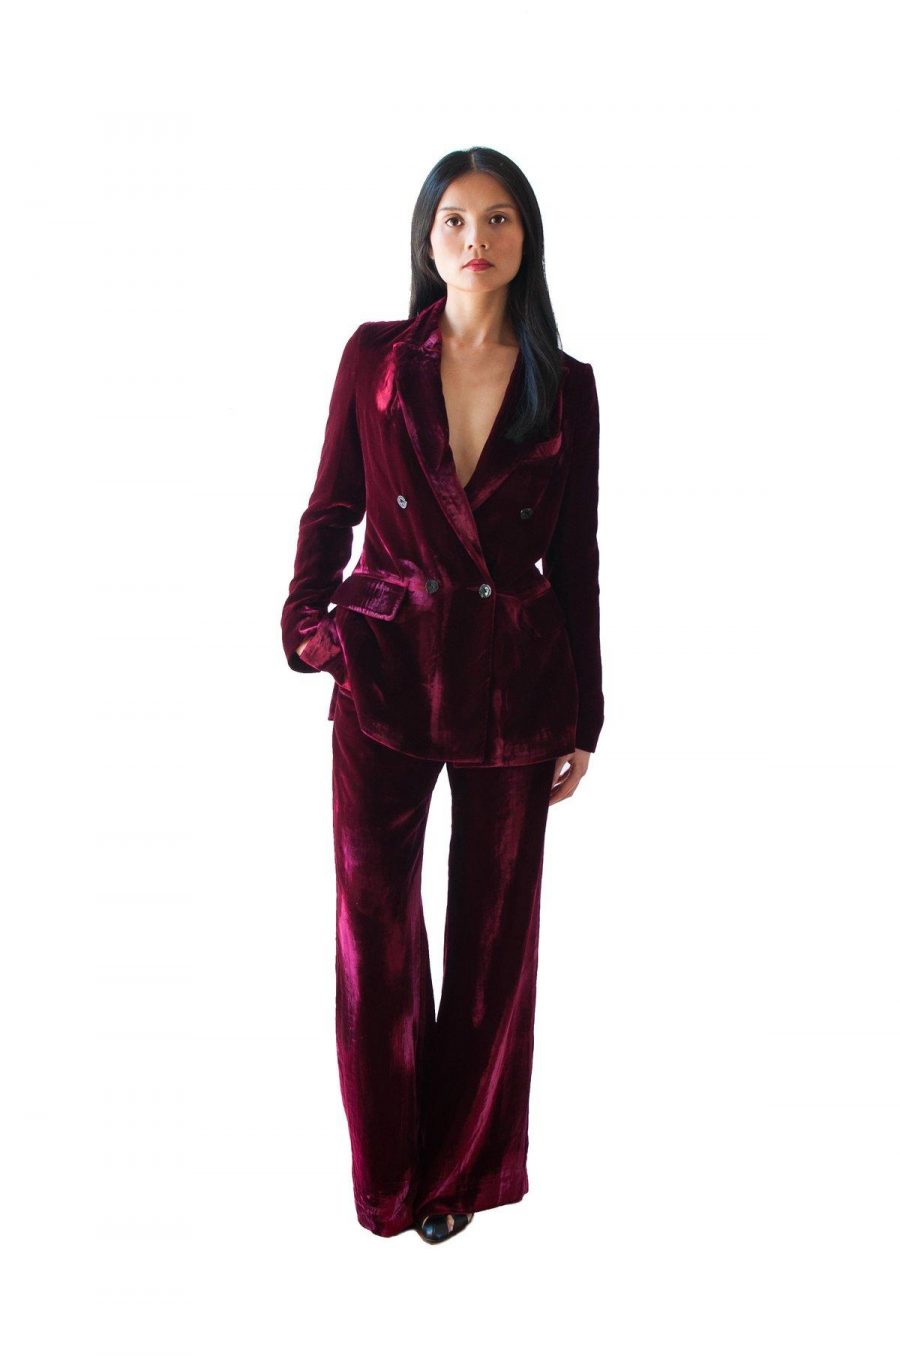 See Need Want Fashion Trend Velvet Suit